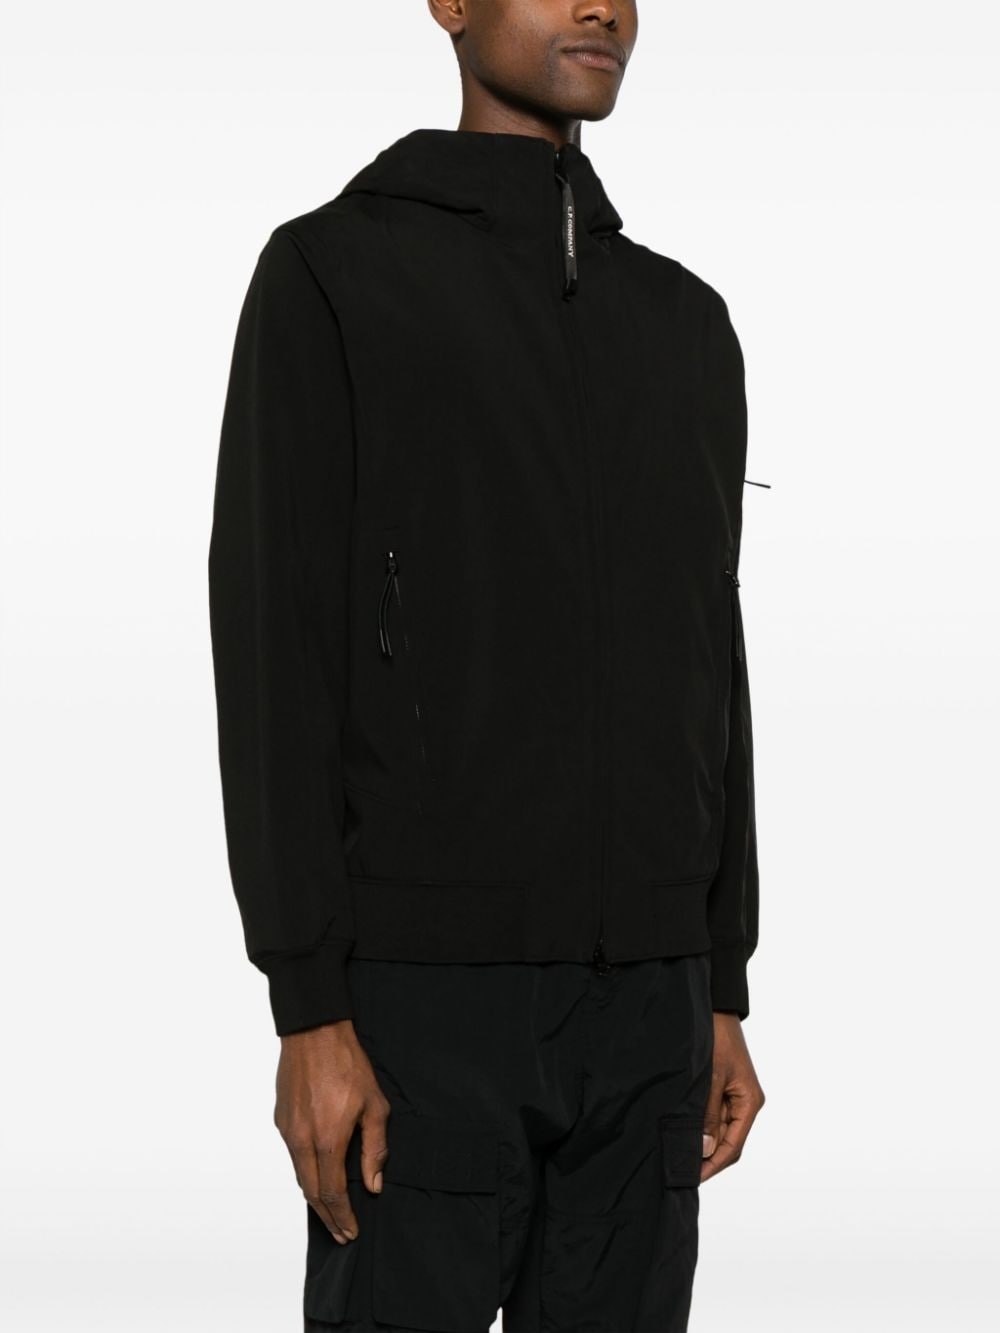 C.P. Shell-R hooded jacket - 3